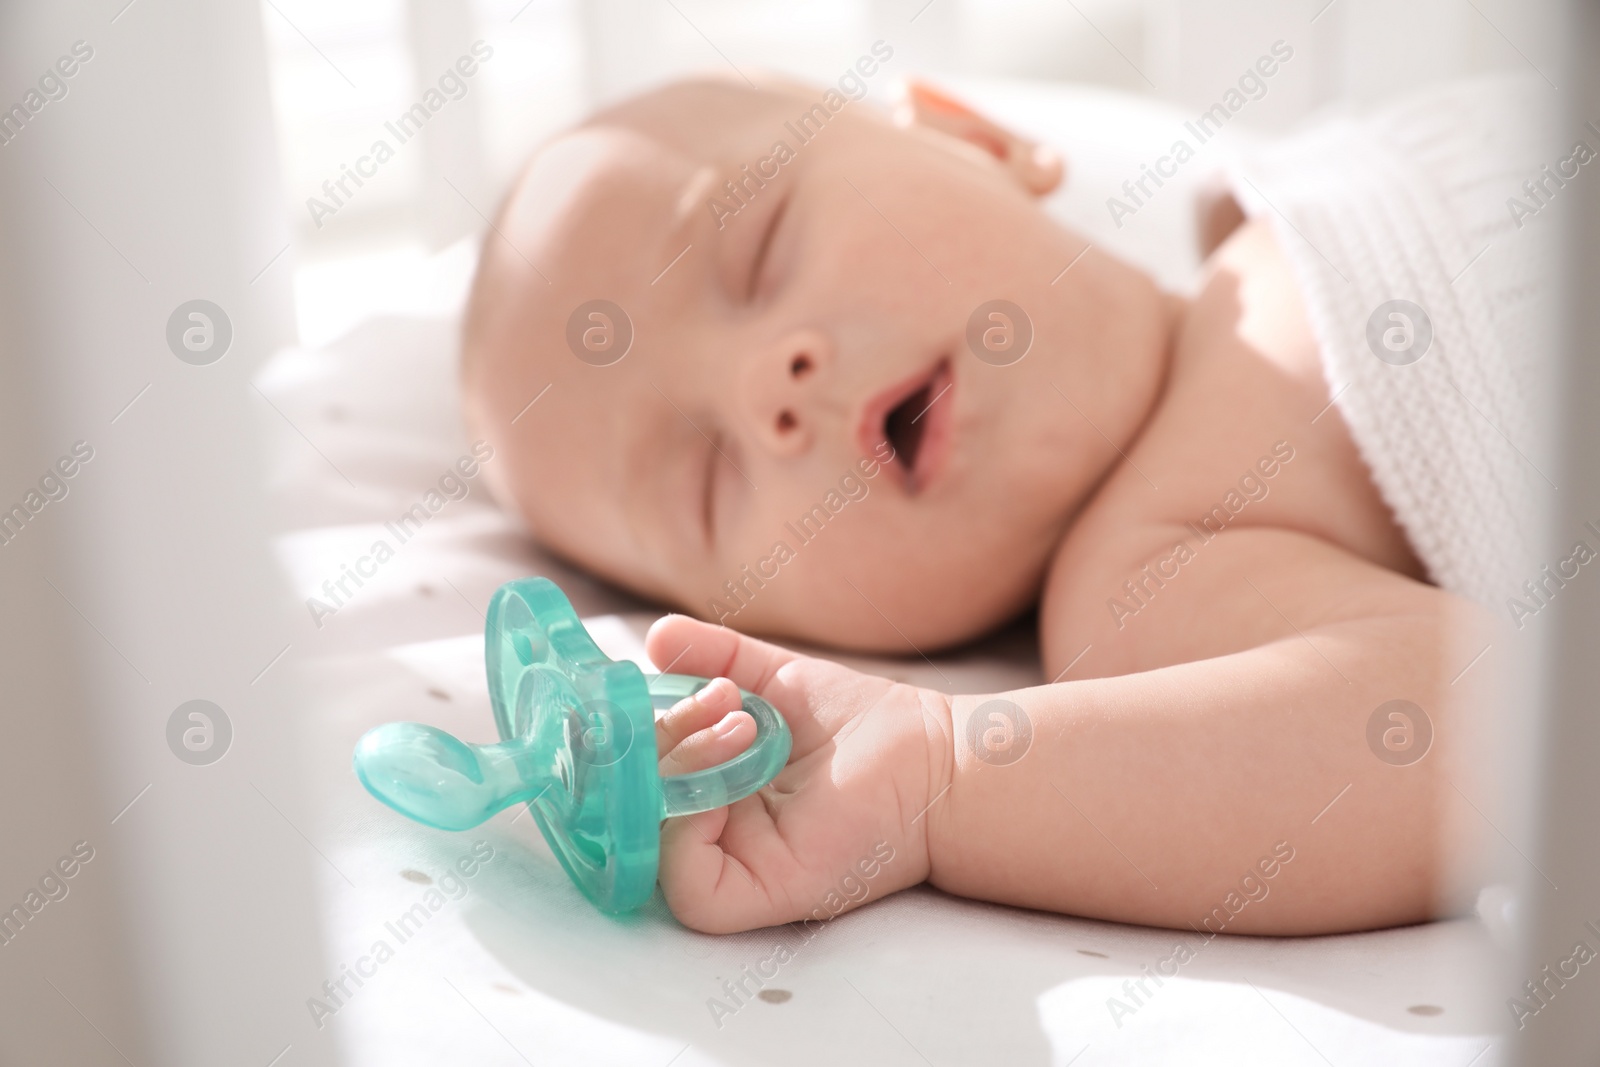 Photo of Cute little baby sleeping in crib, focus on hand with pacifier